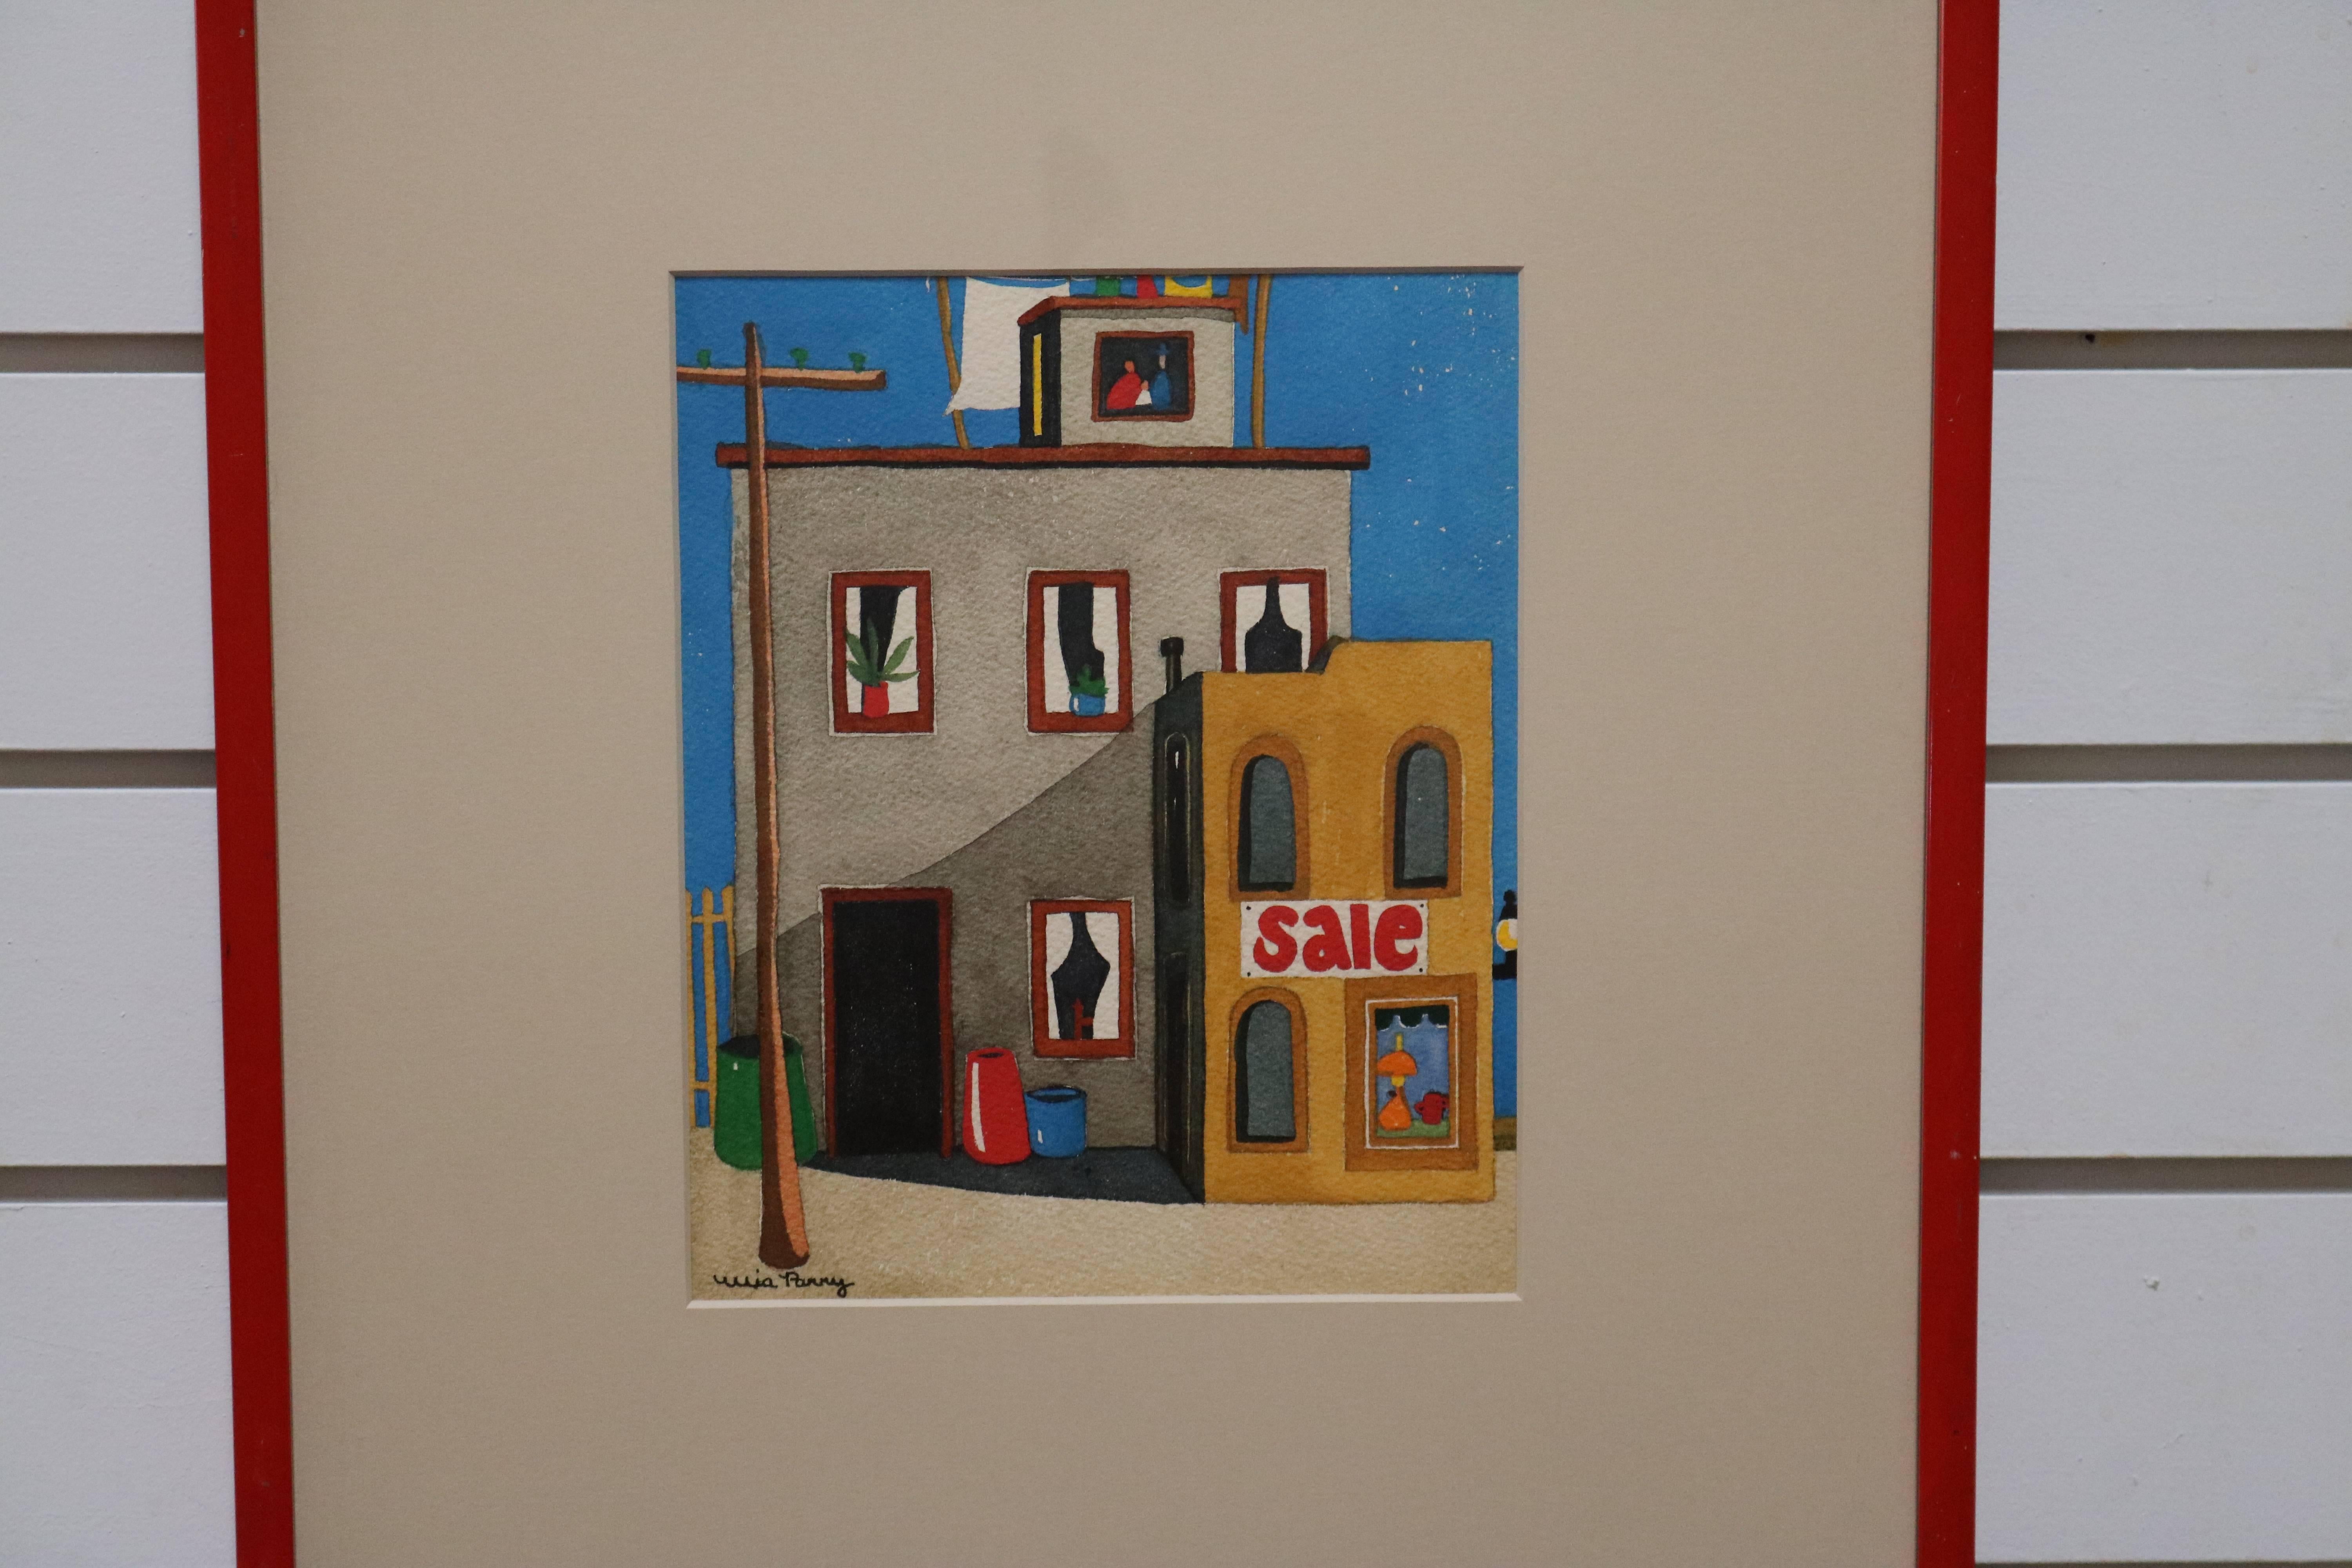 Vibrant, Pop Art style watercolor painting of a small apartment building with a boutique shop in front of it. Signed by the artist; first name is illegible but last name reads 